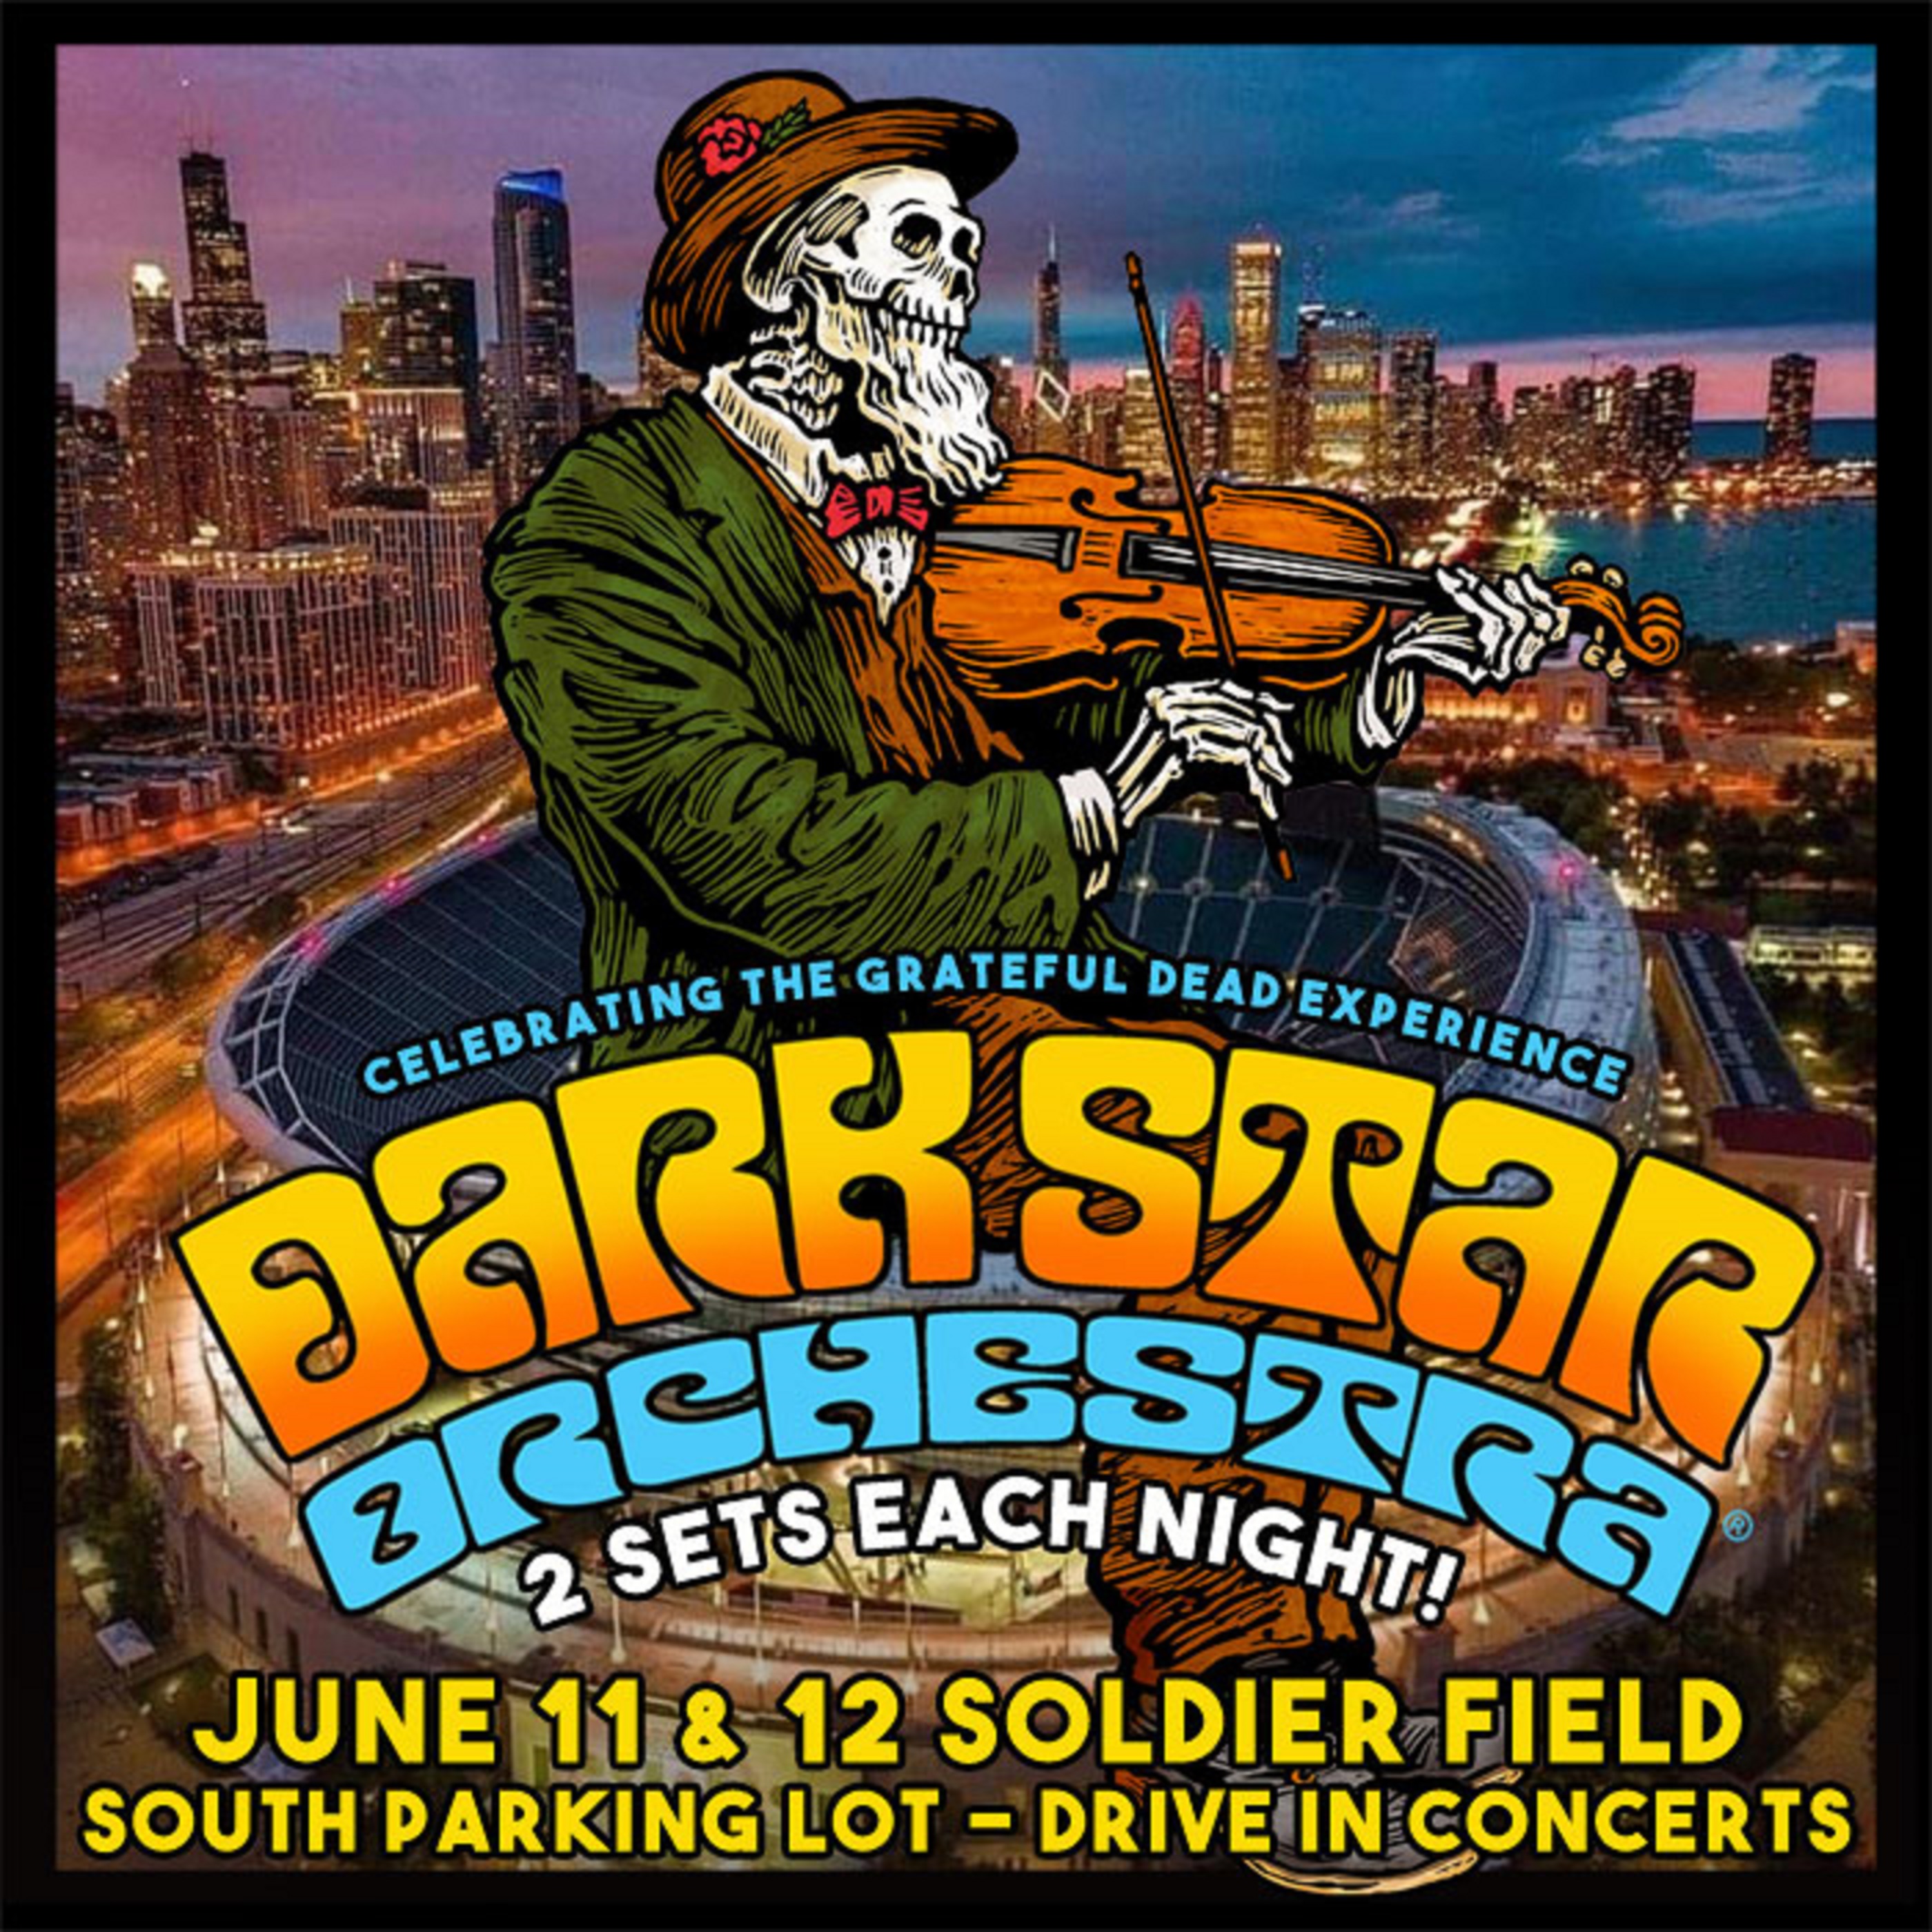 Dark Star Orchestra to Perform in the lot at Soldier Field June 11 & 12, Approach 3000th Show